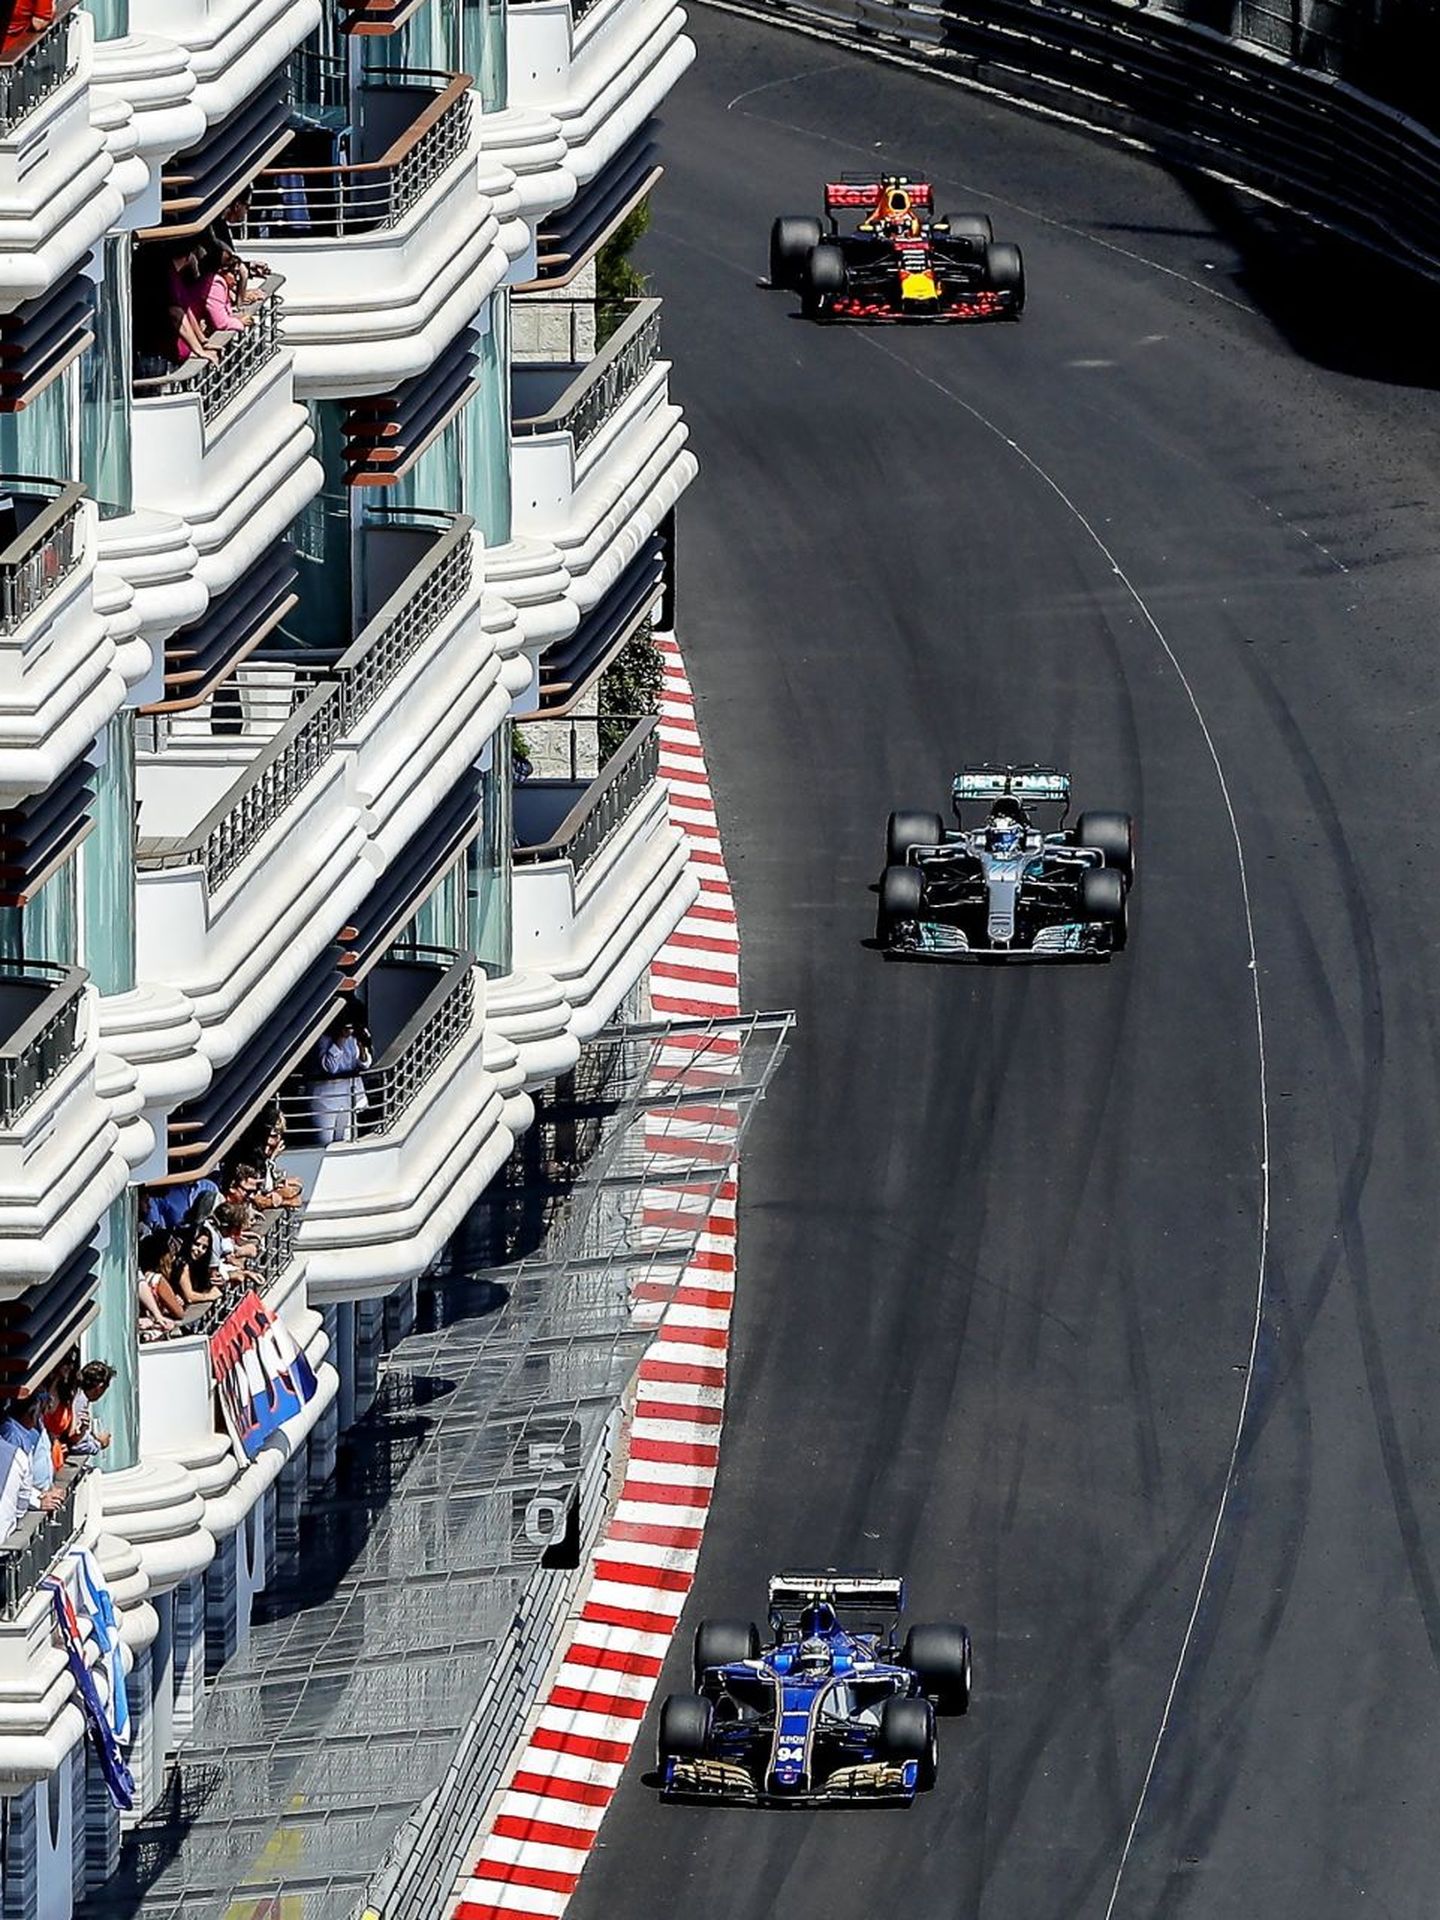 Monte Carlo (Monaco), 28 05 2017.- German Formula One driver Pascal Wehrlein (front) of the Sauber F1 Team, Finnish driver Valtteri Bottas (C) of Mercedes AMG GP and Dutch driver Max Verstappen (back) of Red Bull Racing in action during the 2017 Formula One Grand Prix of Monaco at the Monte Carlo circuit in Monaco, 28 May 2017. (Fórmula Uno) EFE EPA VALDRIN XHEMAJ